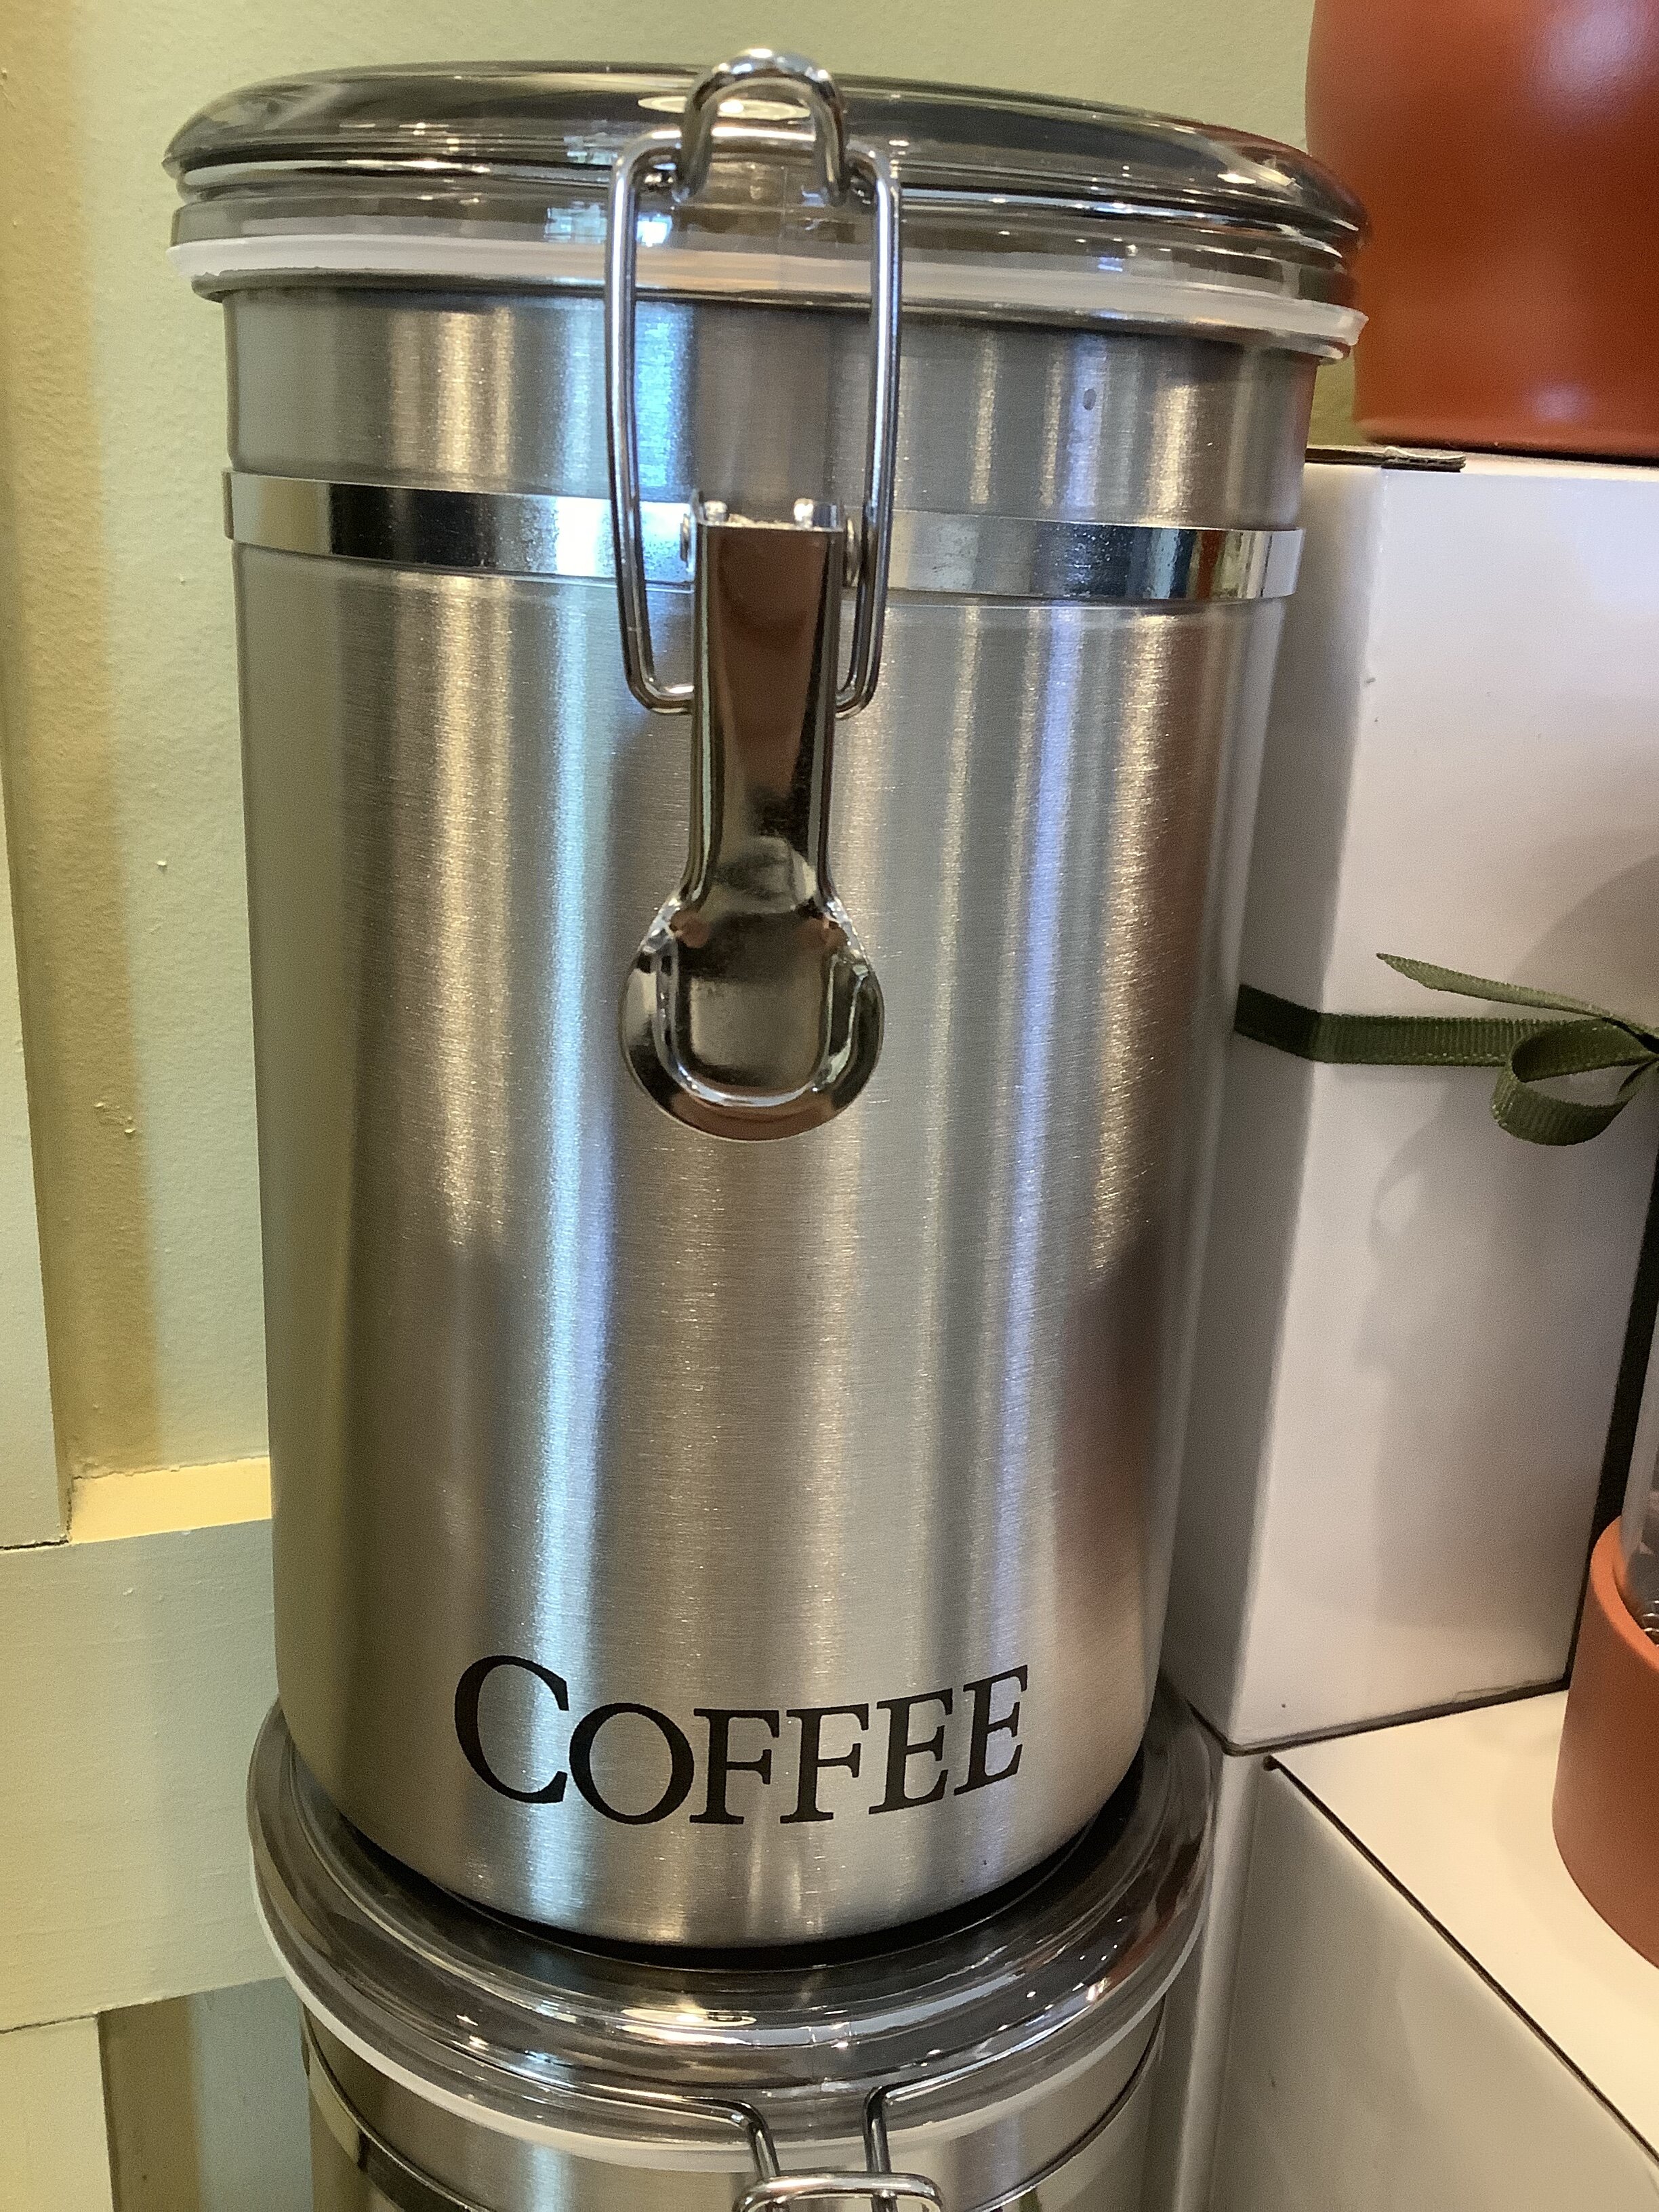 62oz Stainless Steel Coffee Canister by OGGI